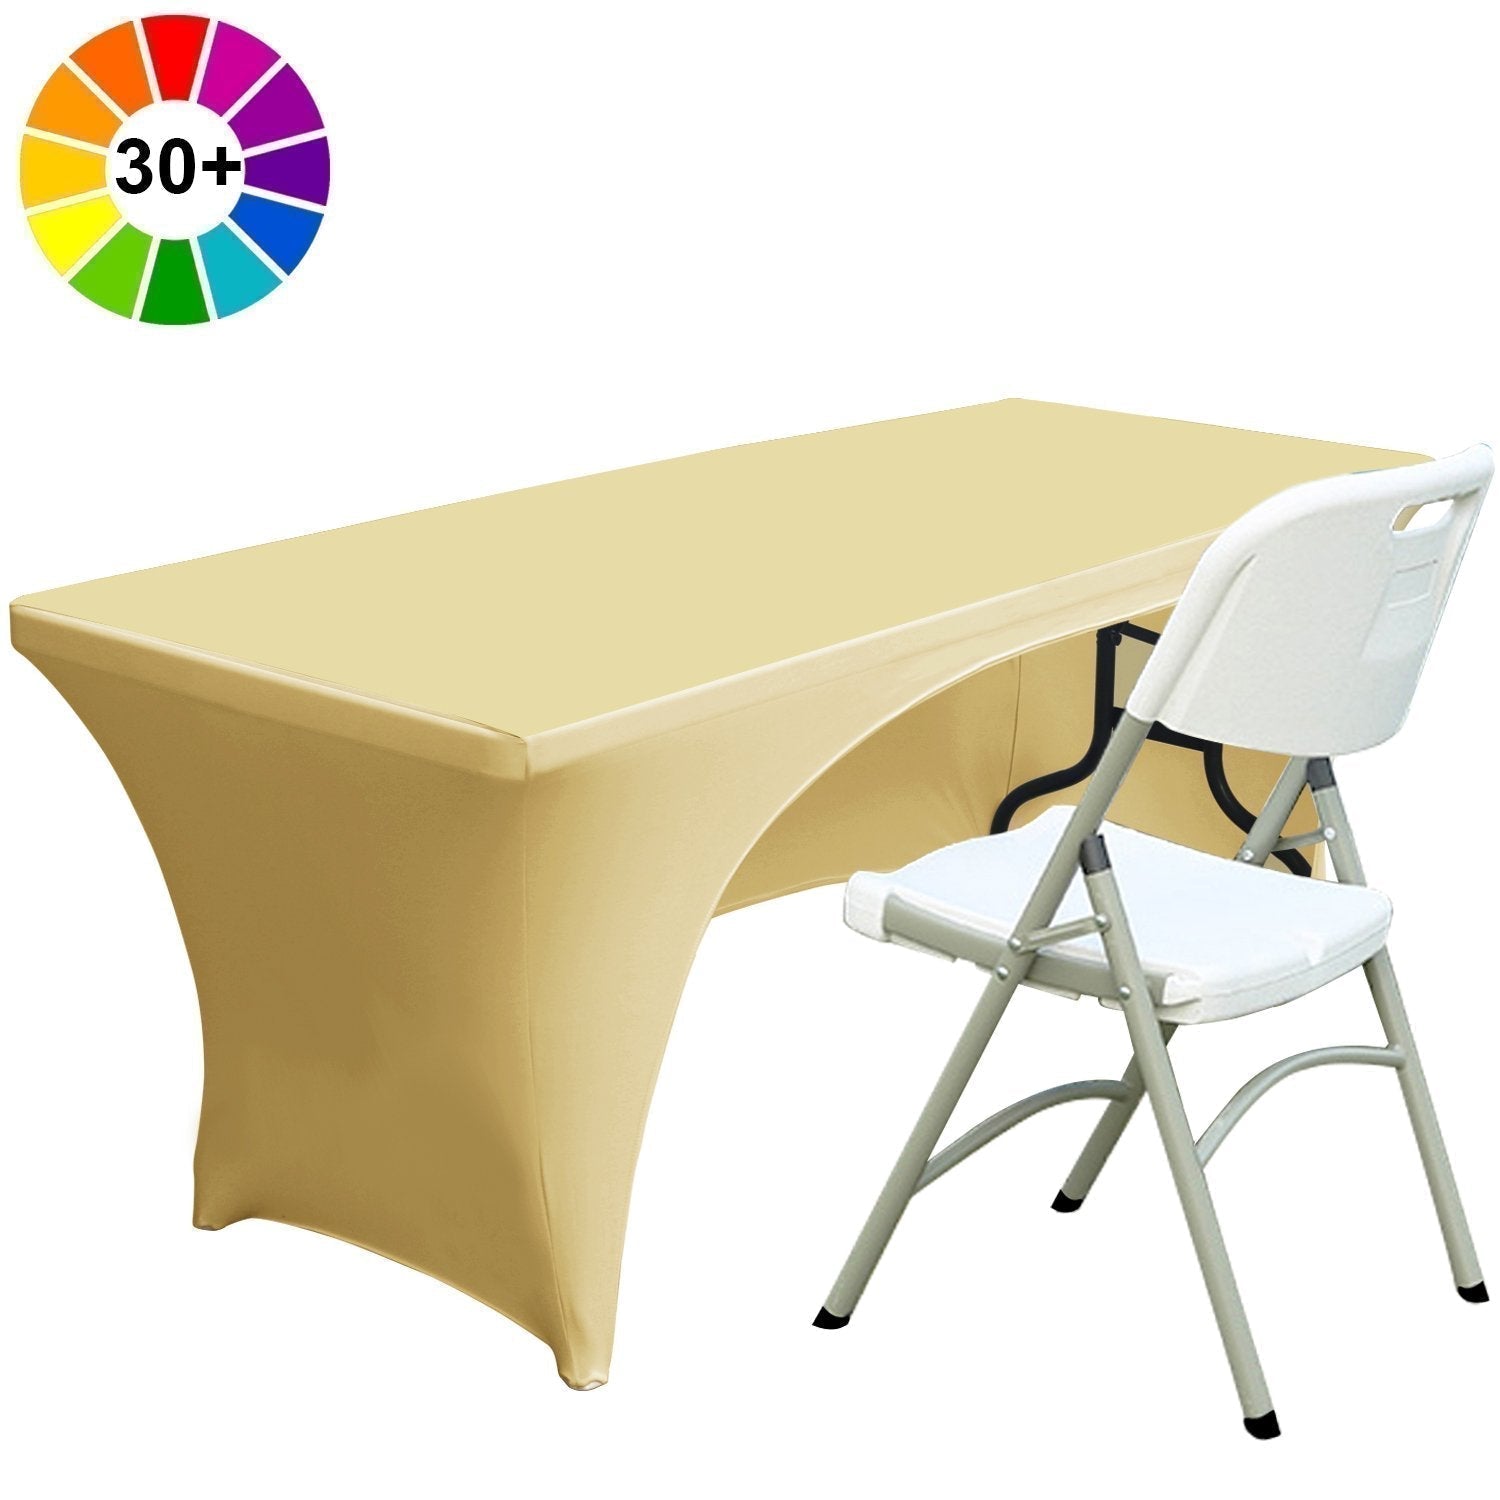 Spandex Table Cover Fitted Polyester Tablecloth - ABC-CANOPY